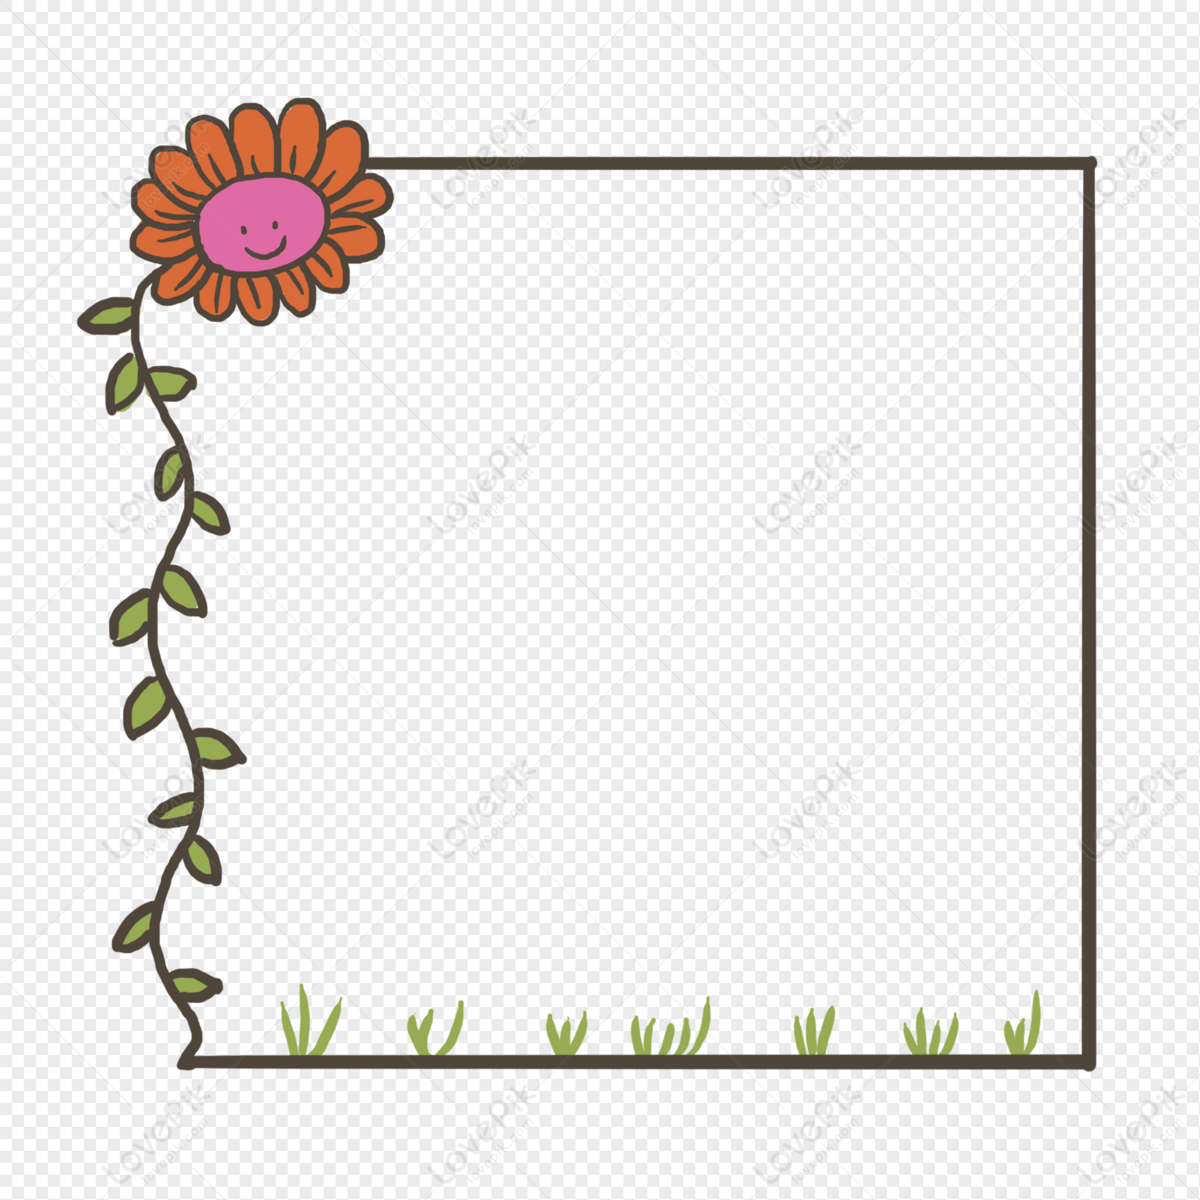 Hand Painted Flower Vine Decorative Border PNG Free Download And ...